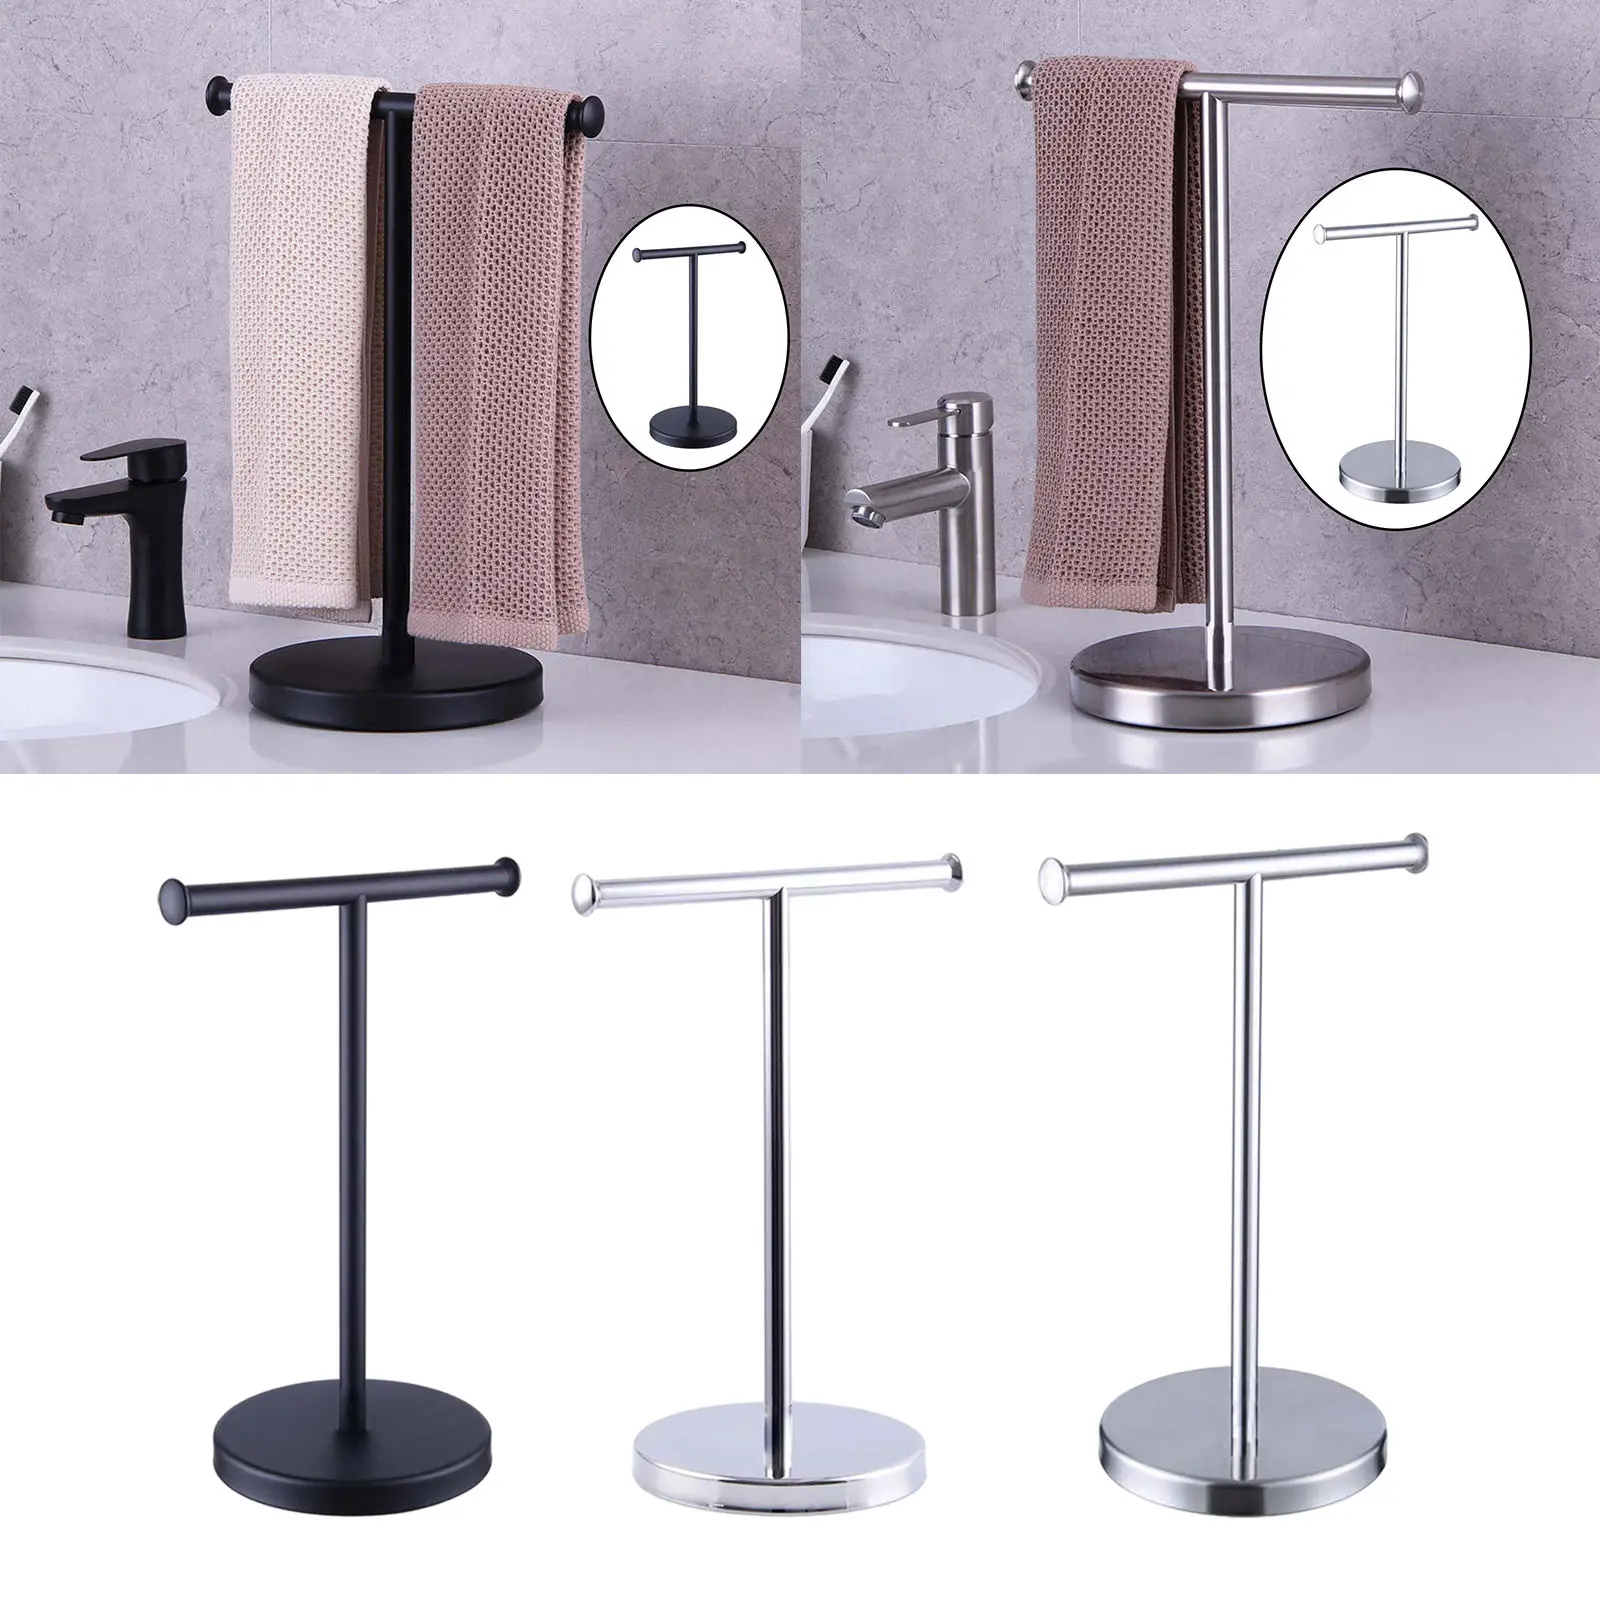 Stainless Steel Jewelry Standing Movable Accessories T Shape Towel Holder Stand Towel Rack Bath Stand for Home Bathroom Kitchen